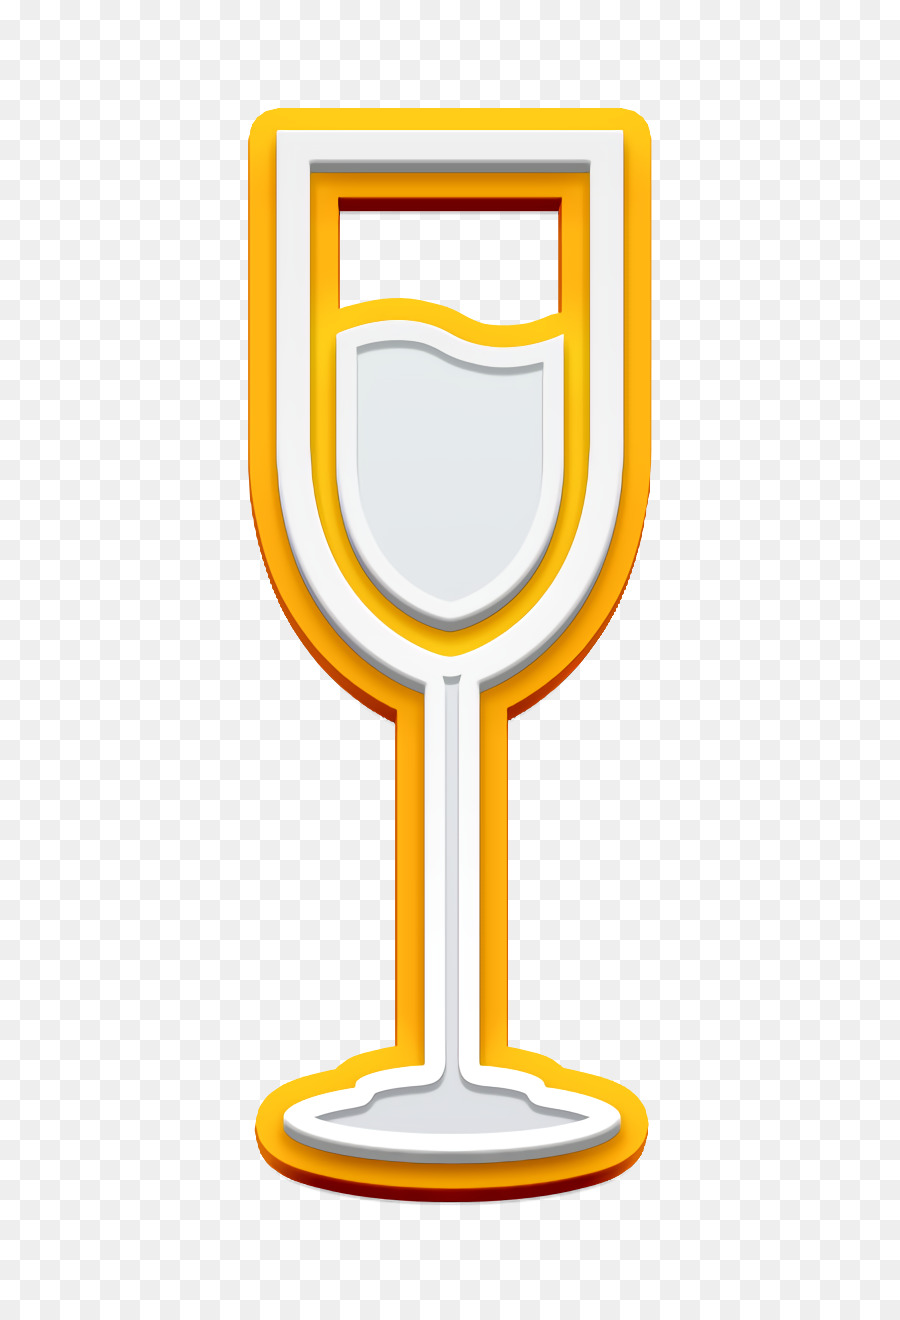 Champagne icon food icon Champagne glass with drink icon